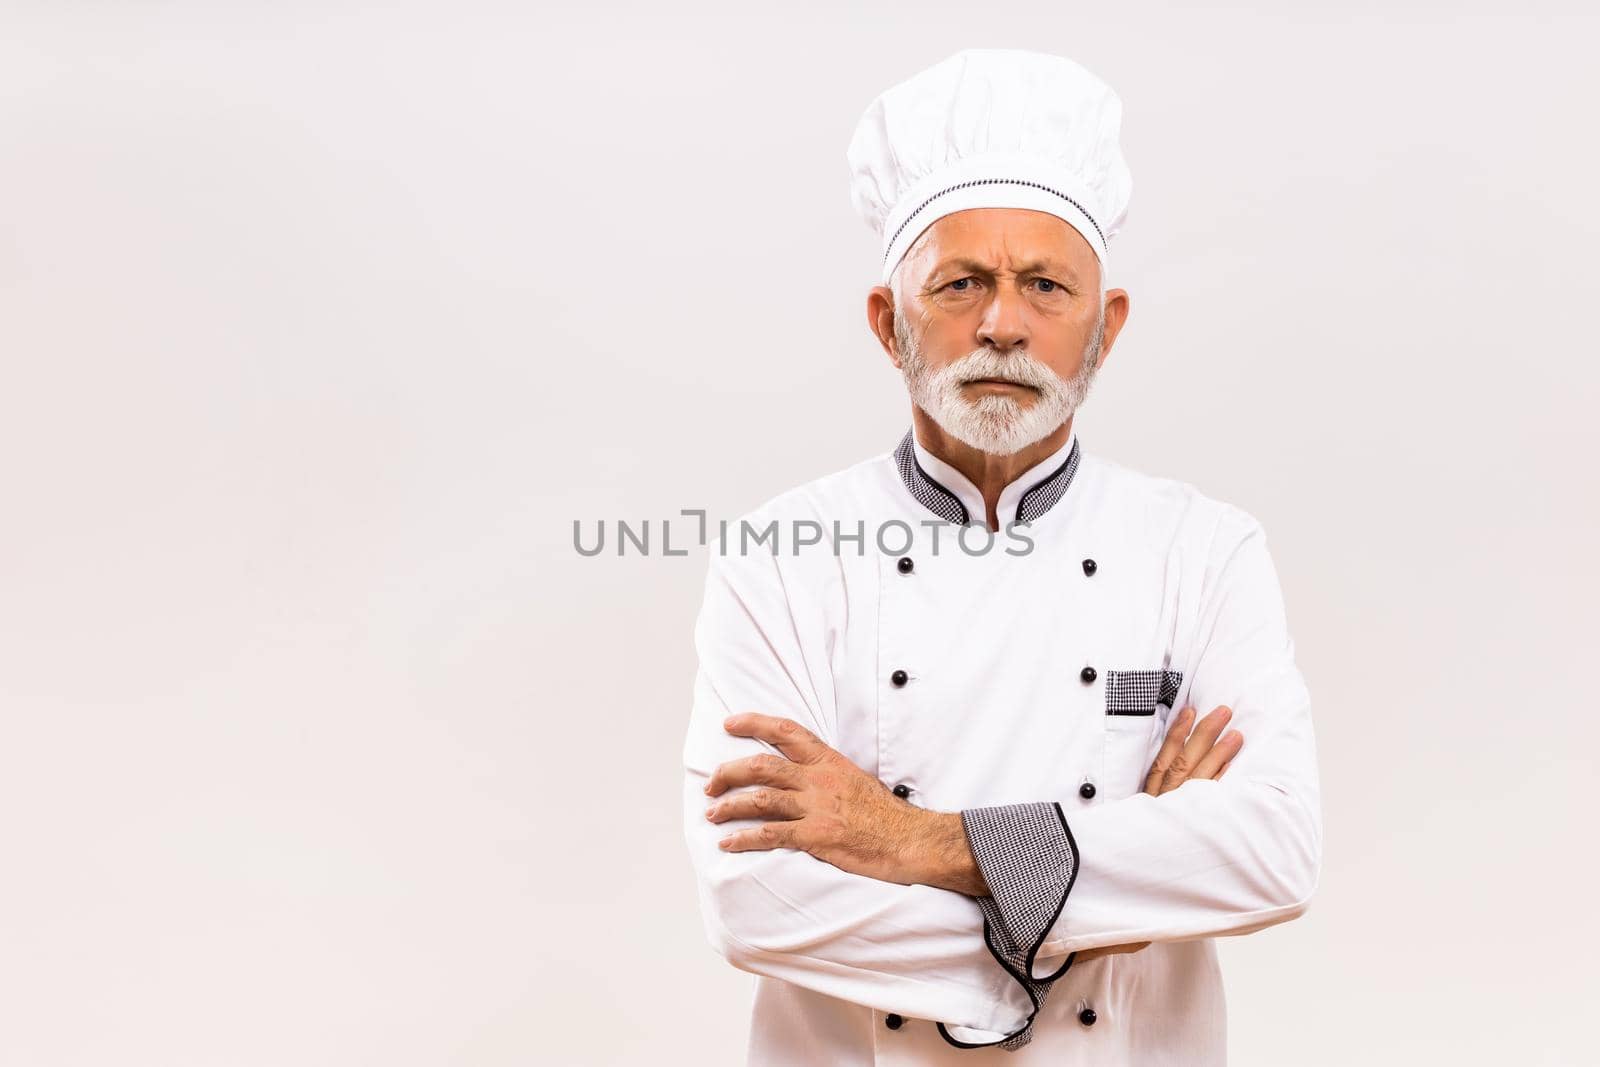 Portrait of angry senior chef  on gray background.